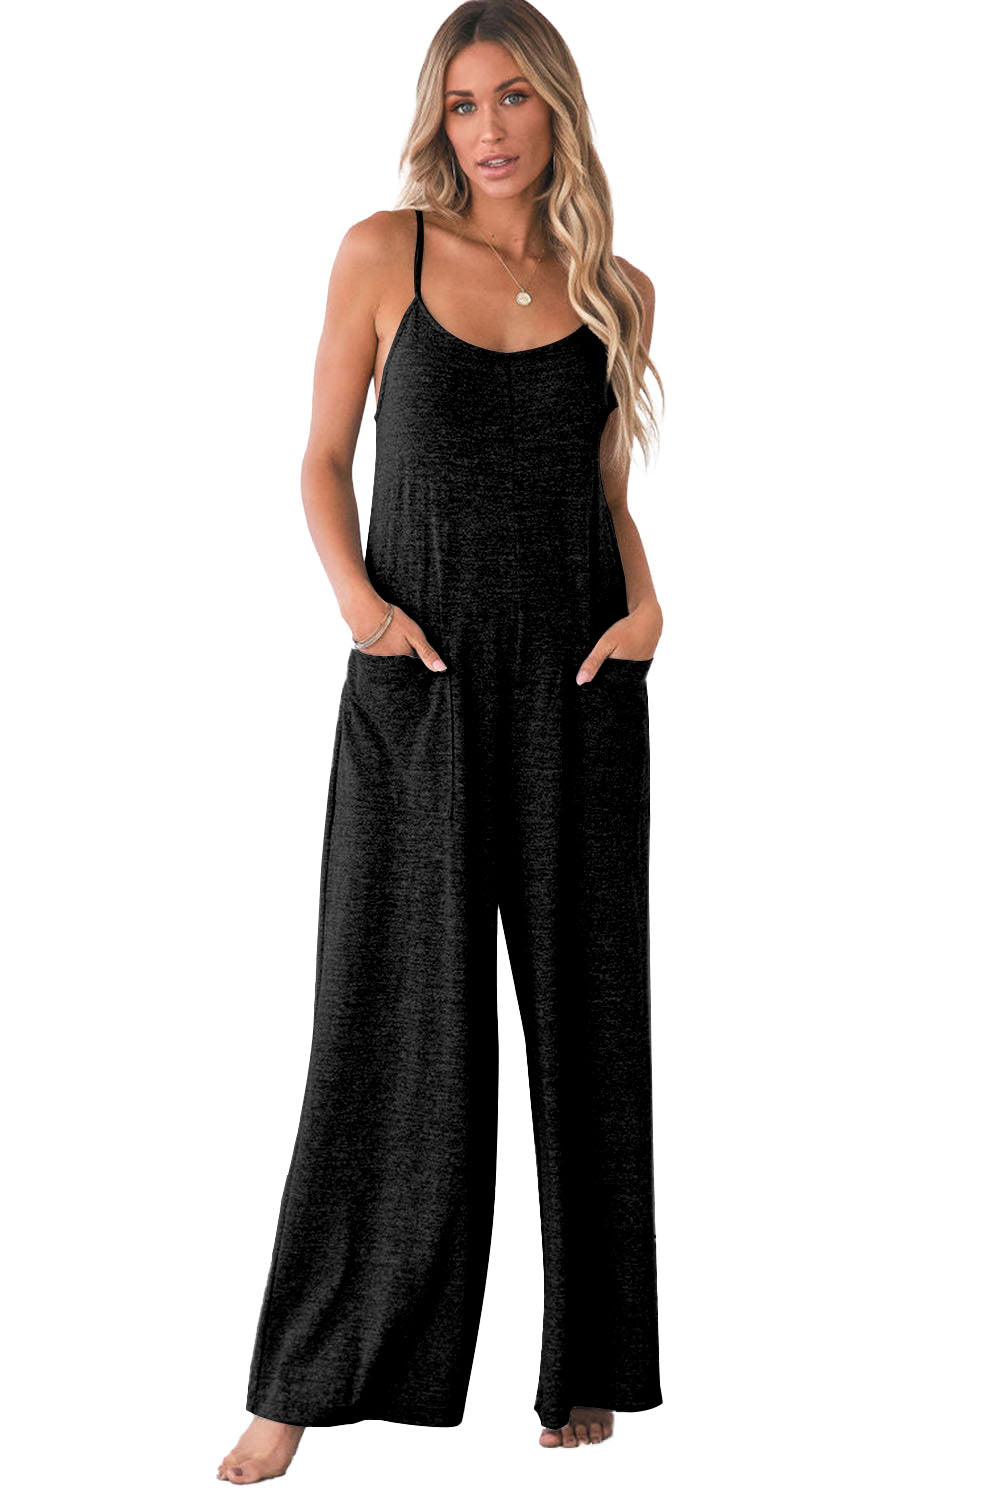 Gray Loose Fit Side Pockets Spaghetti Strap Wide Leg Jumpsuit